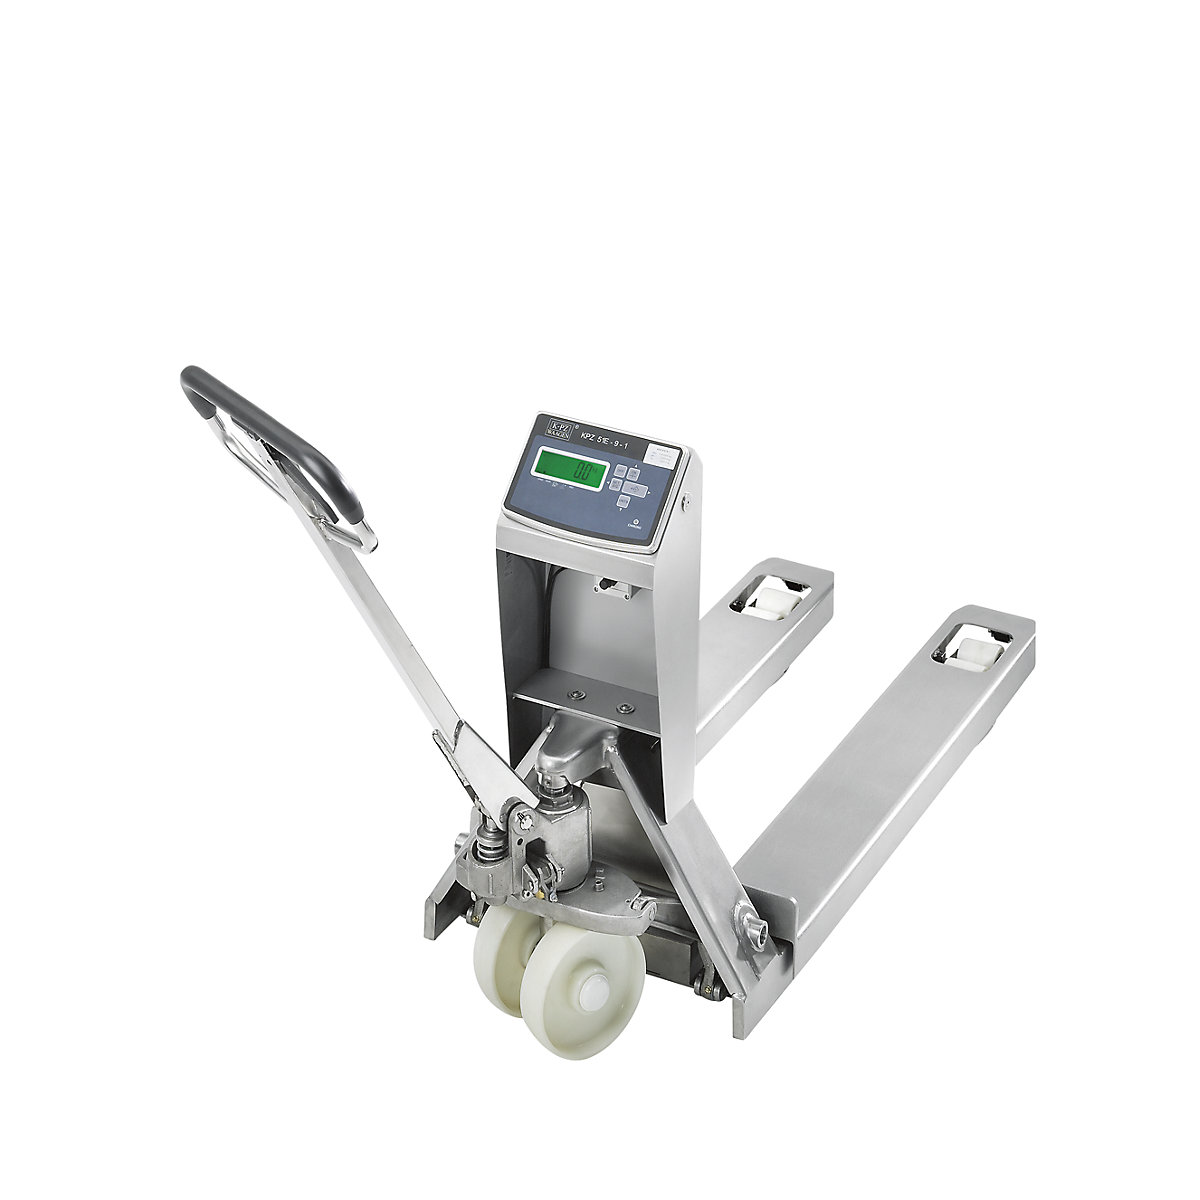 Stainless steel pallet truck with precision scale